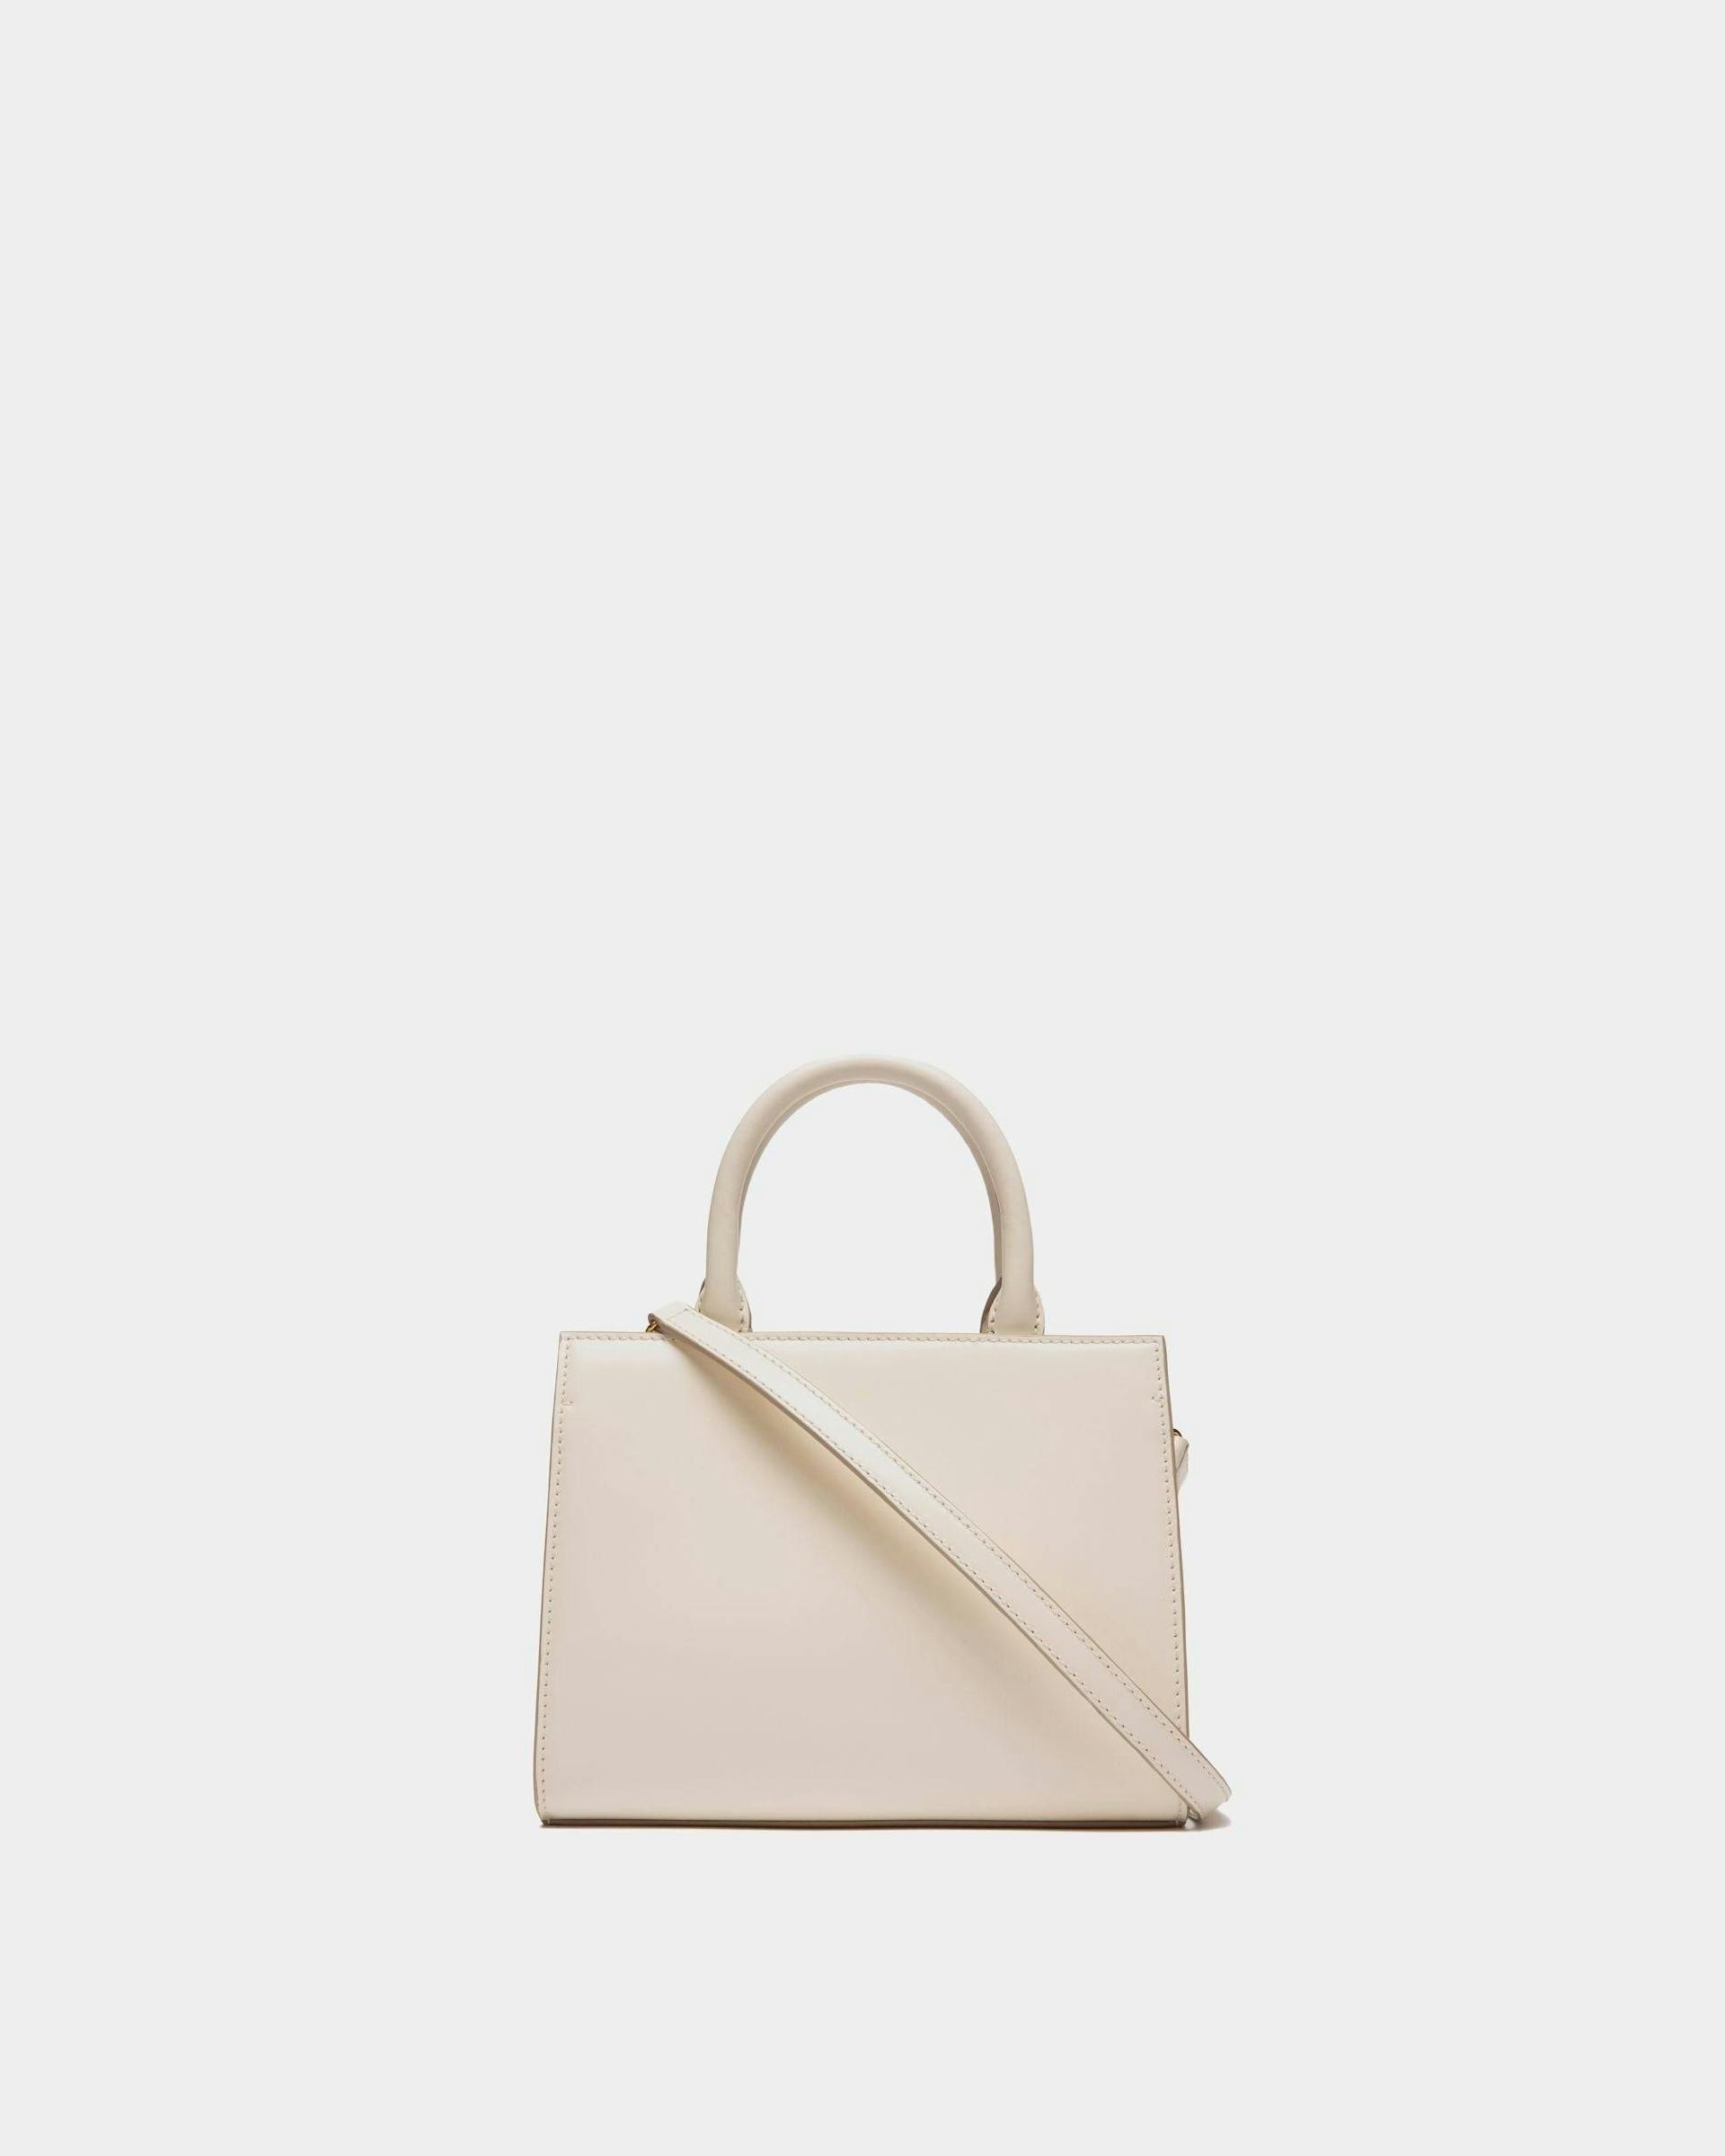 Women's Emblem Small Tote Bag in White Patent Leather | Bally | Still Life Back